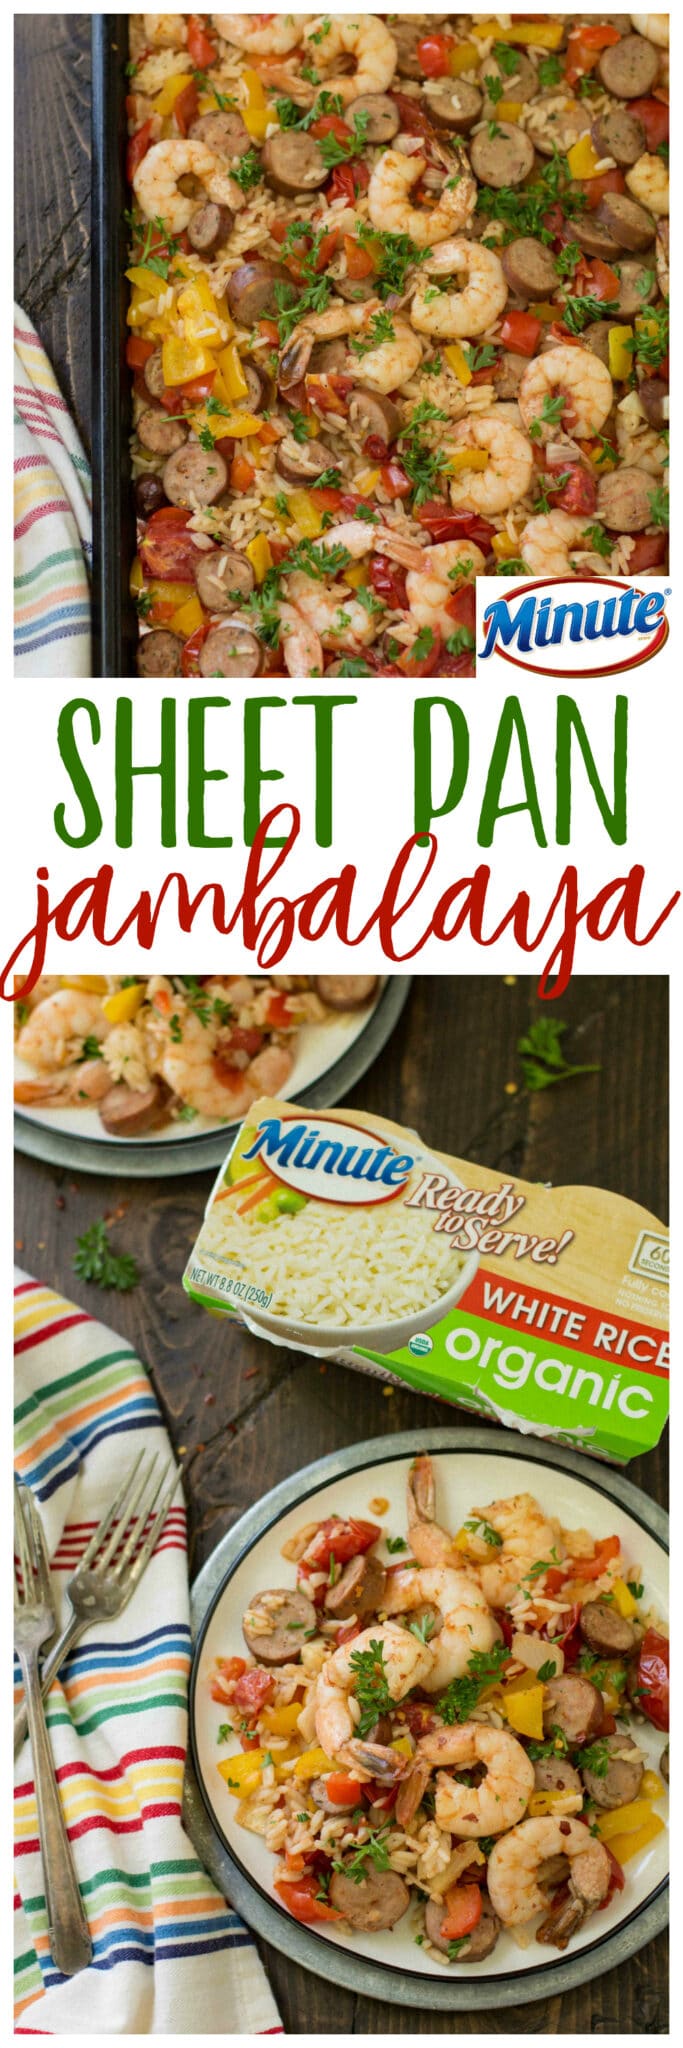 This Healthy Sheet Pan Jambalaya is a major crowd-pleaser, uses only one pan and is totally mess-free. That’s right. ONE PAN. No newspapers. No bags. No clean-up!